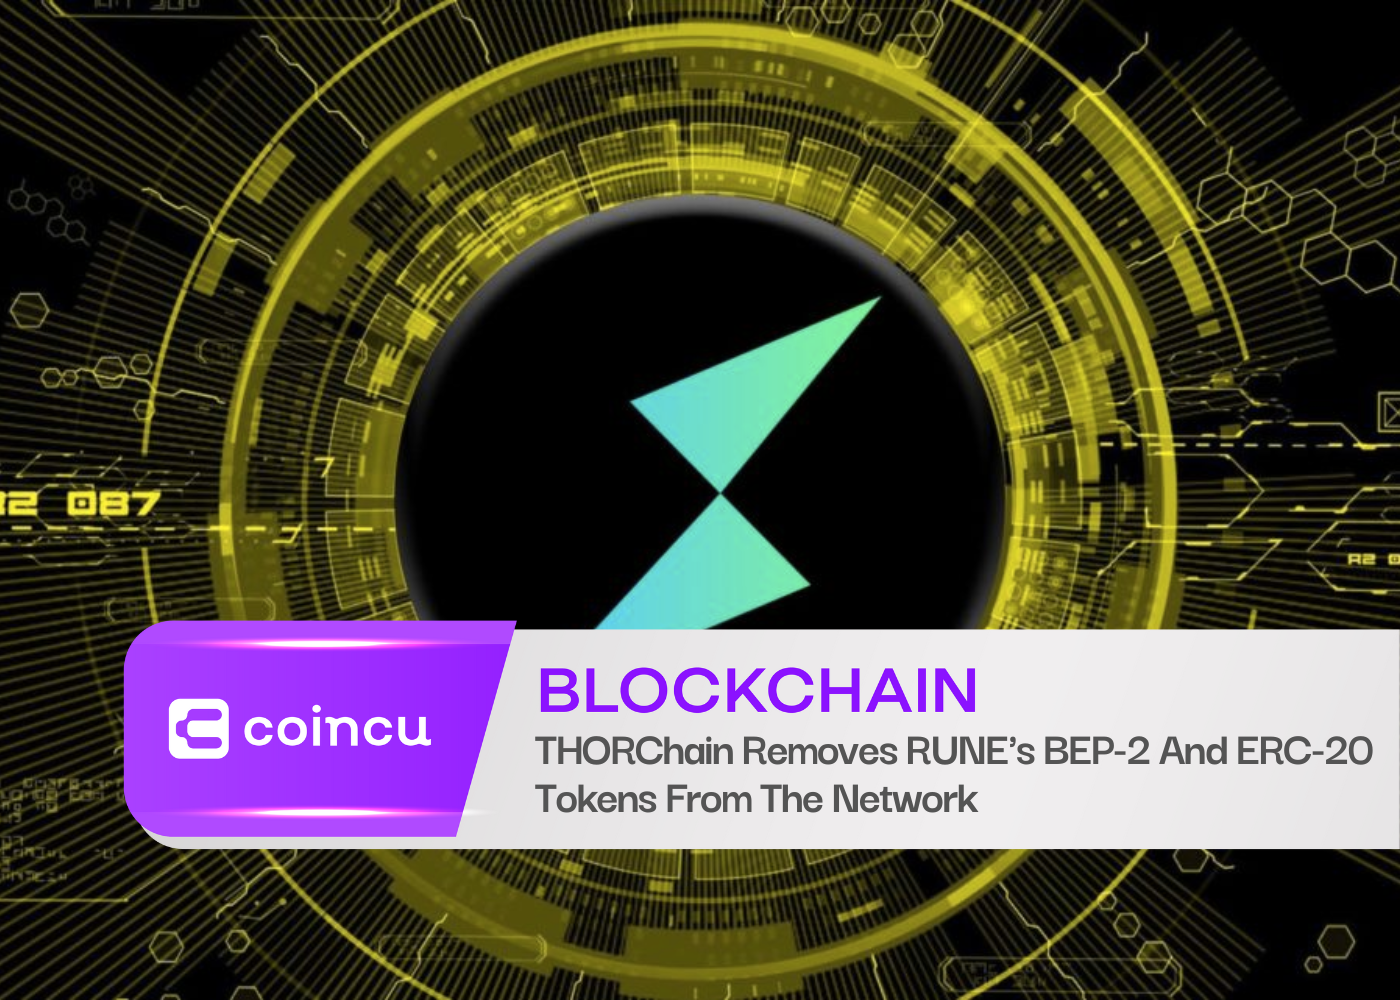 THORChain Removes RUNE's BEP-2 And ERC-20 Tokens From The Network